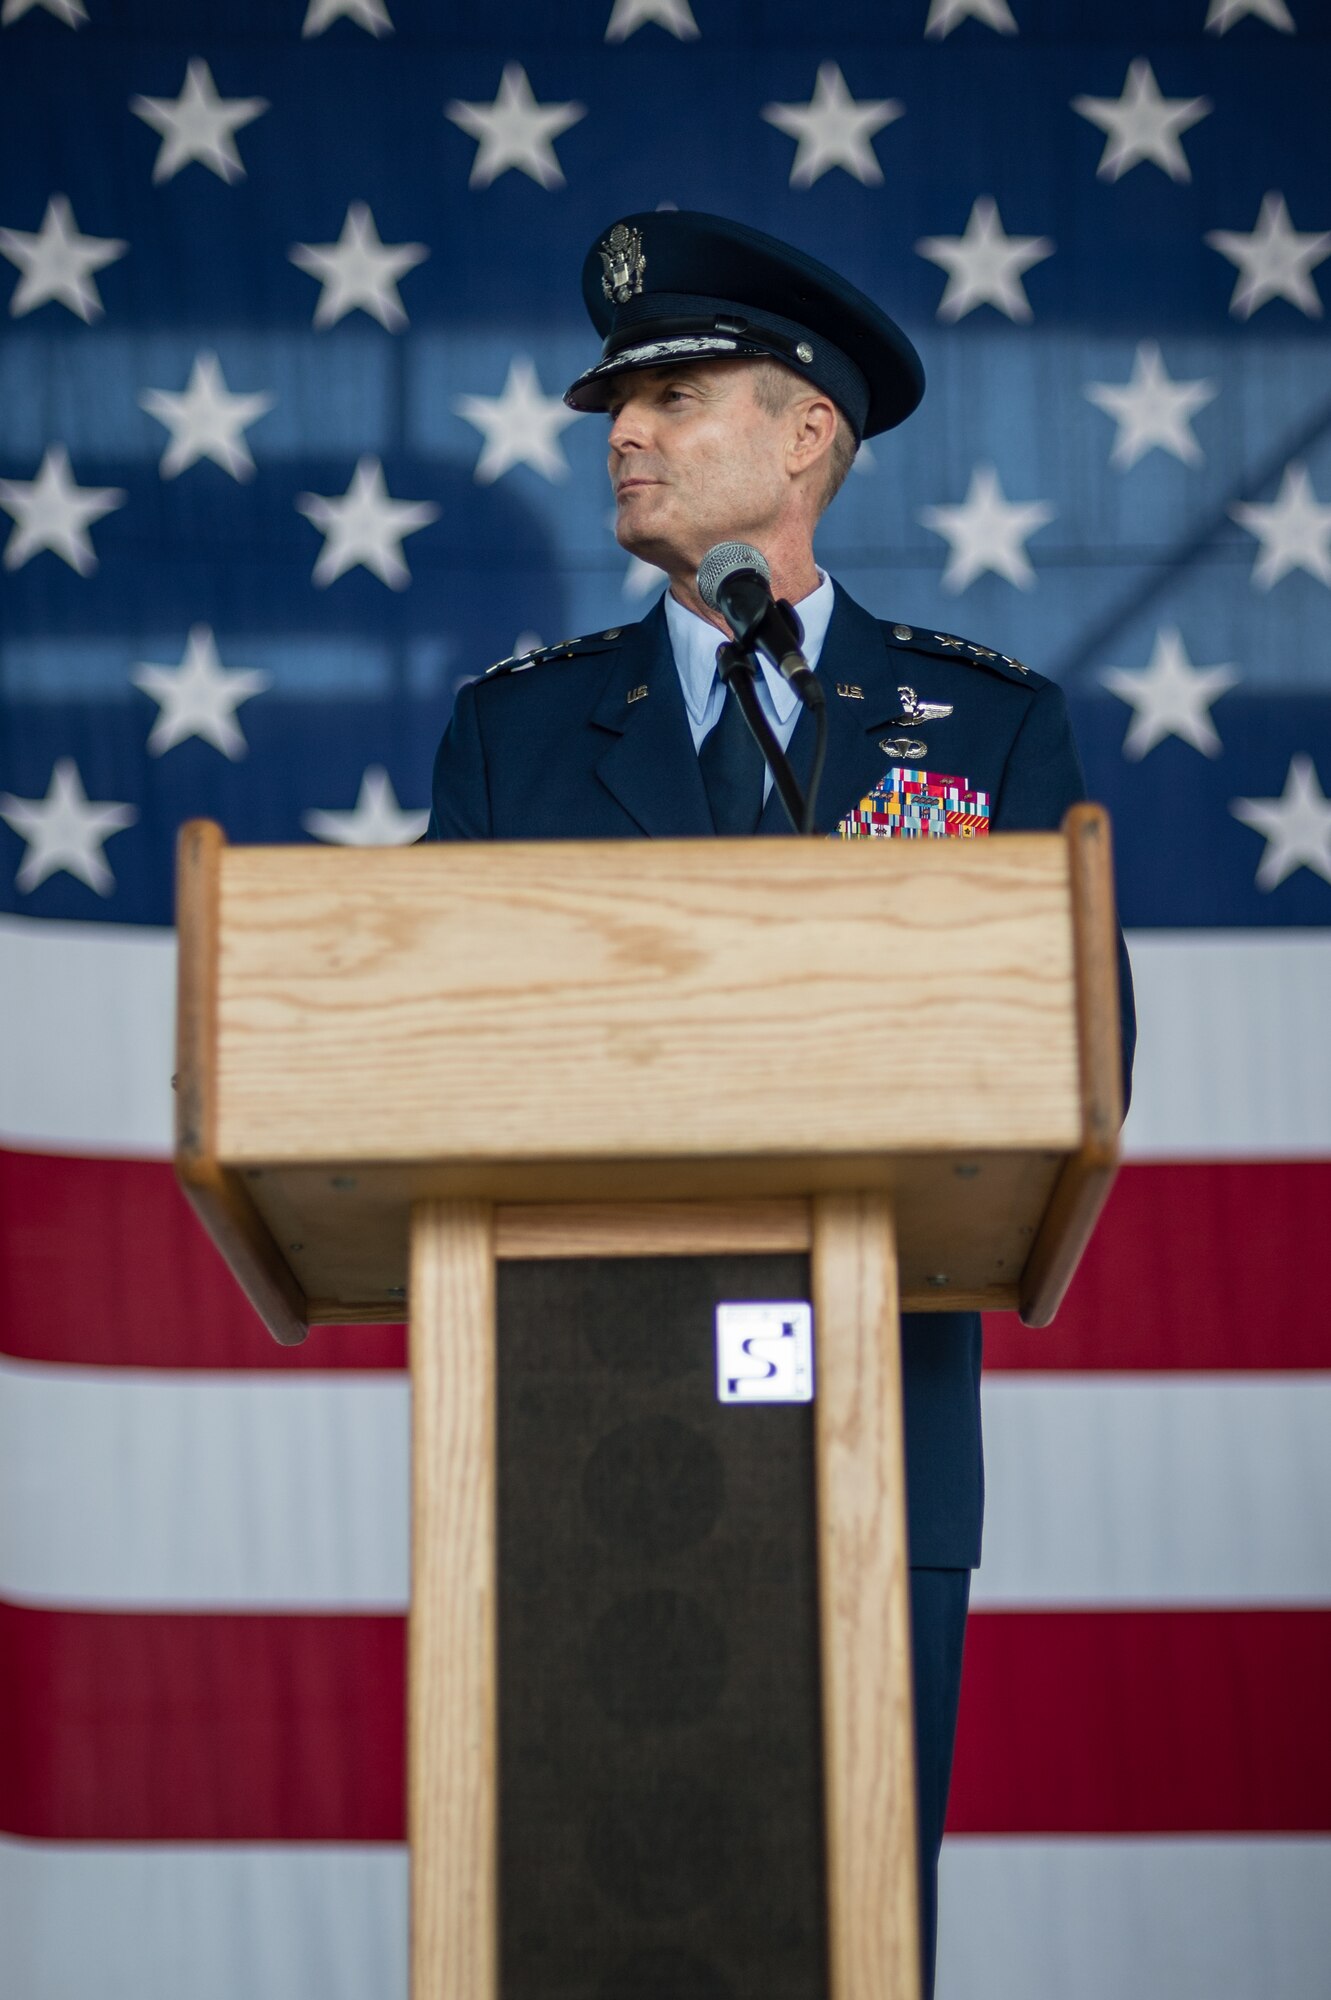 Lt. Gen. Darryl Roberson, 3rd Air Force commander, speaks about his new position during the 3rd Air Force assumption of command ceremony June 11, 2014, Ramstein Air Base, Germany. Roberson comes to 3rd Air Force from his previous assignment as the vice director of operations on the joint staff in Washington, D.C.  The command provides full-spectrum Air Force war-fighting capabilities throughout an area of responsibility that spans three continents and encompasses 104 countries. (U.S. Air Force photo/ Airman 1st Class Jordan Castelan)